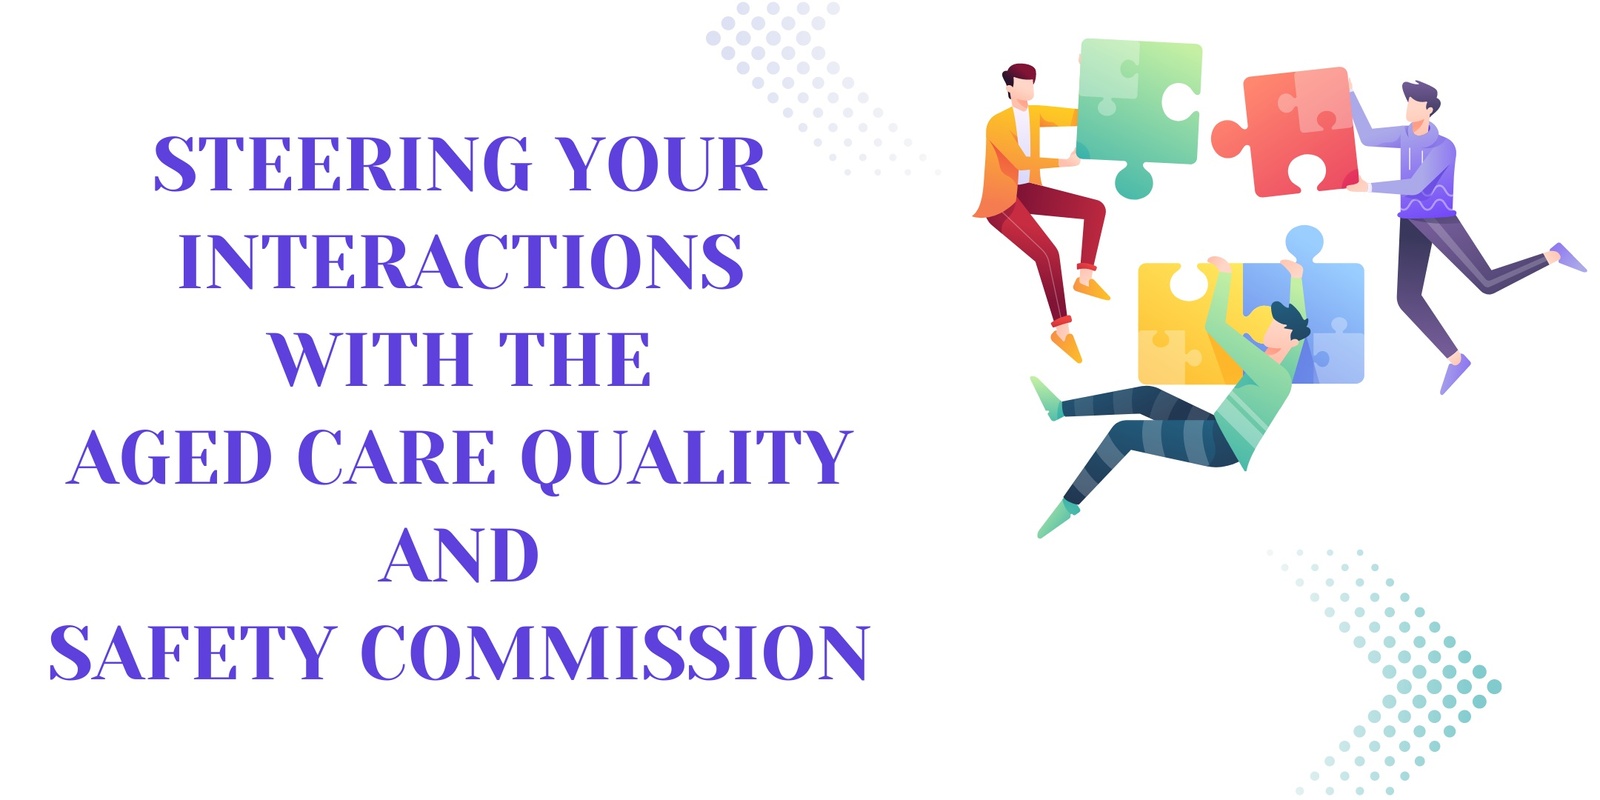 Banner image for Steering your Interactions with the Aged Care Quality and Safety Commission